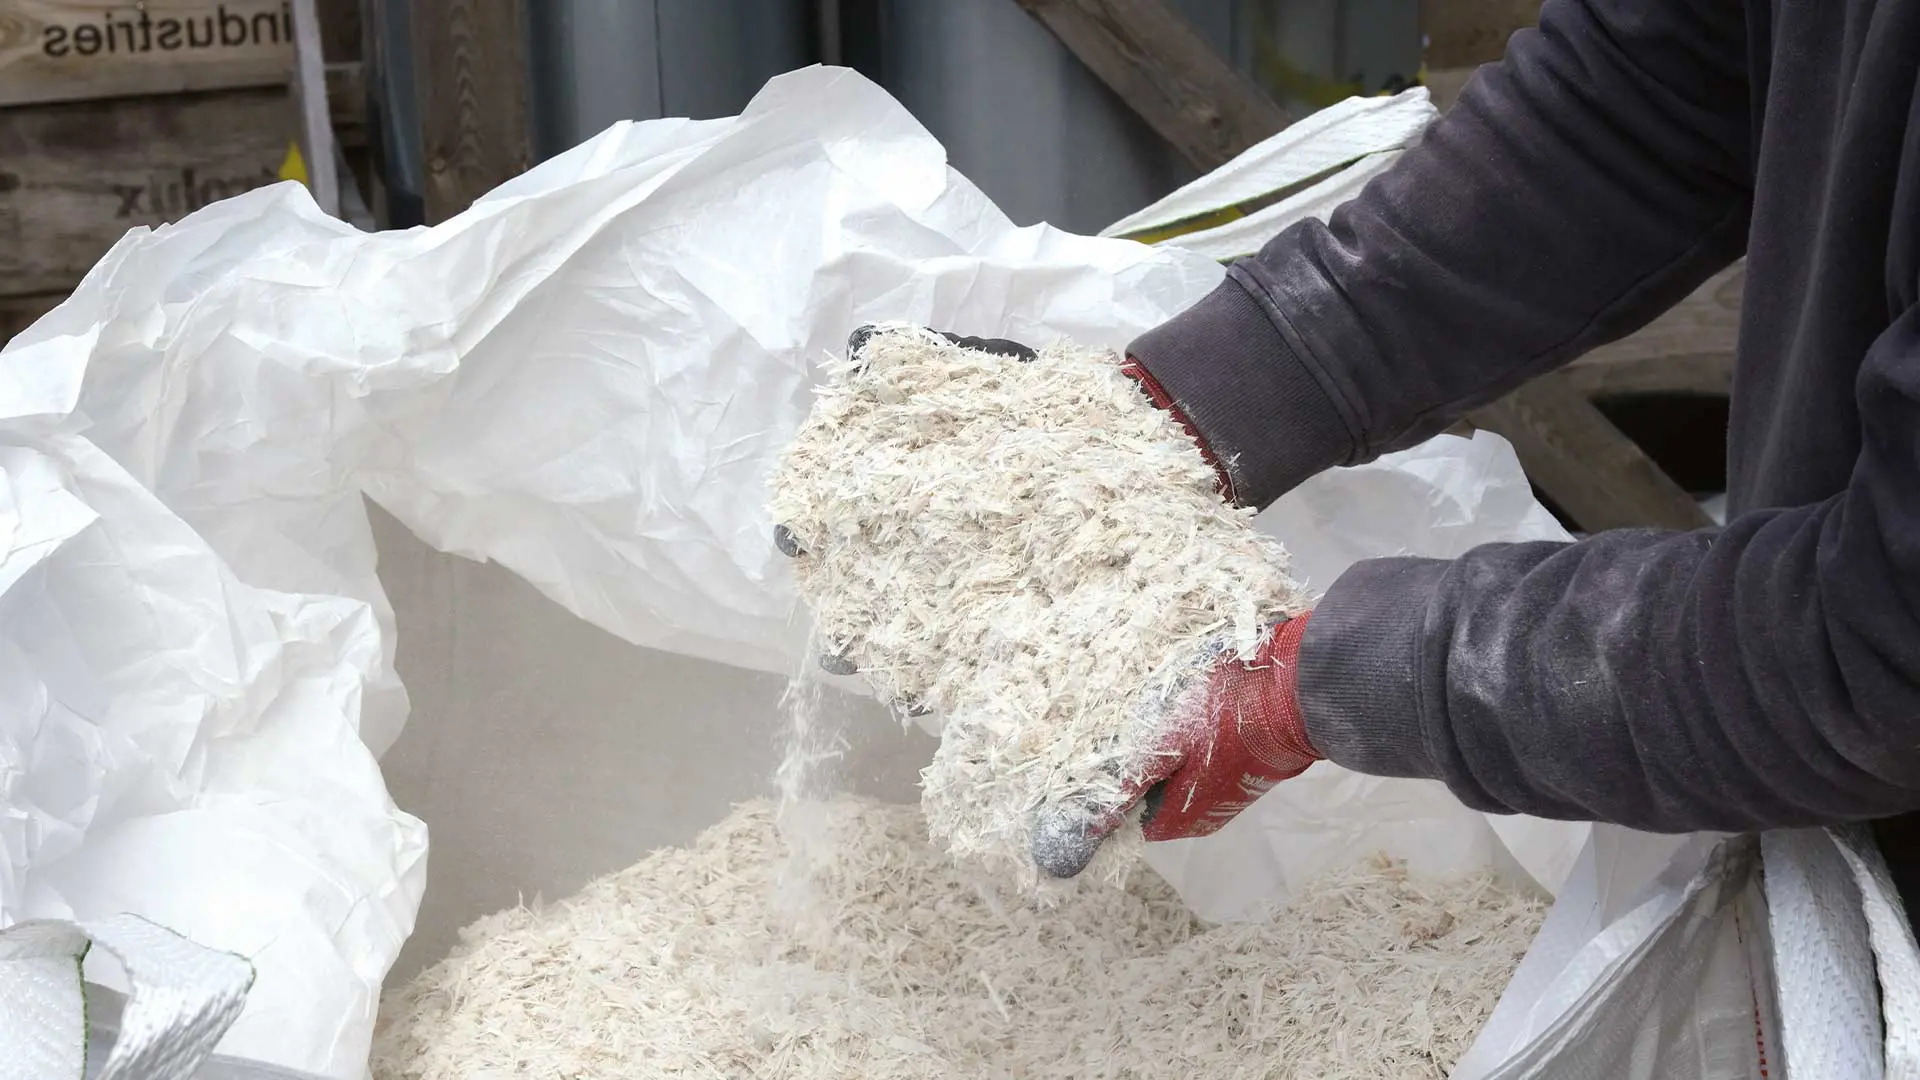 Shredded glass fibre being held by an unseen person